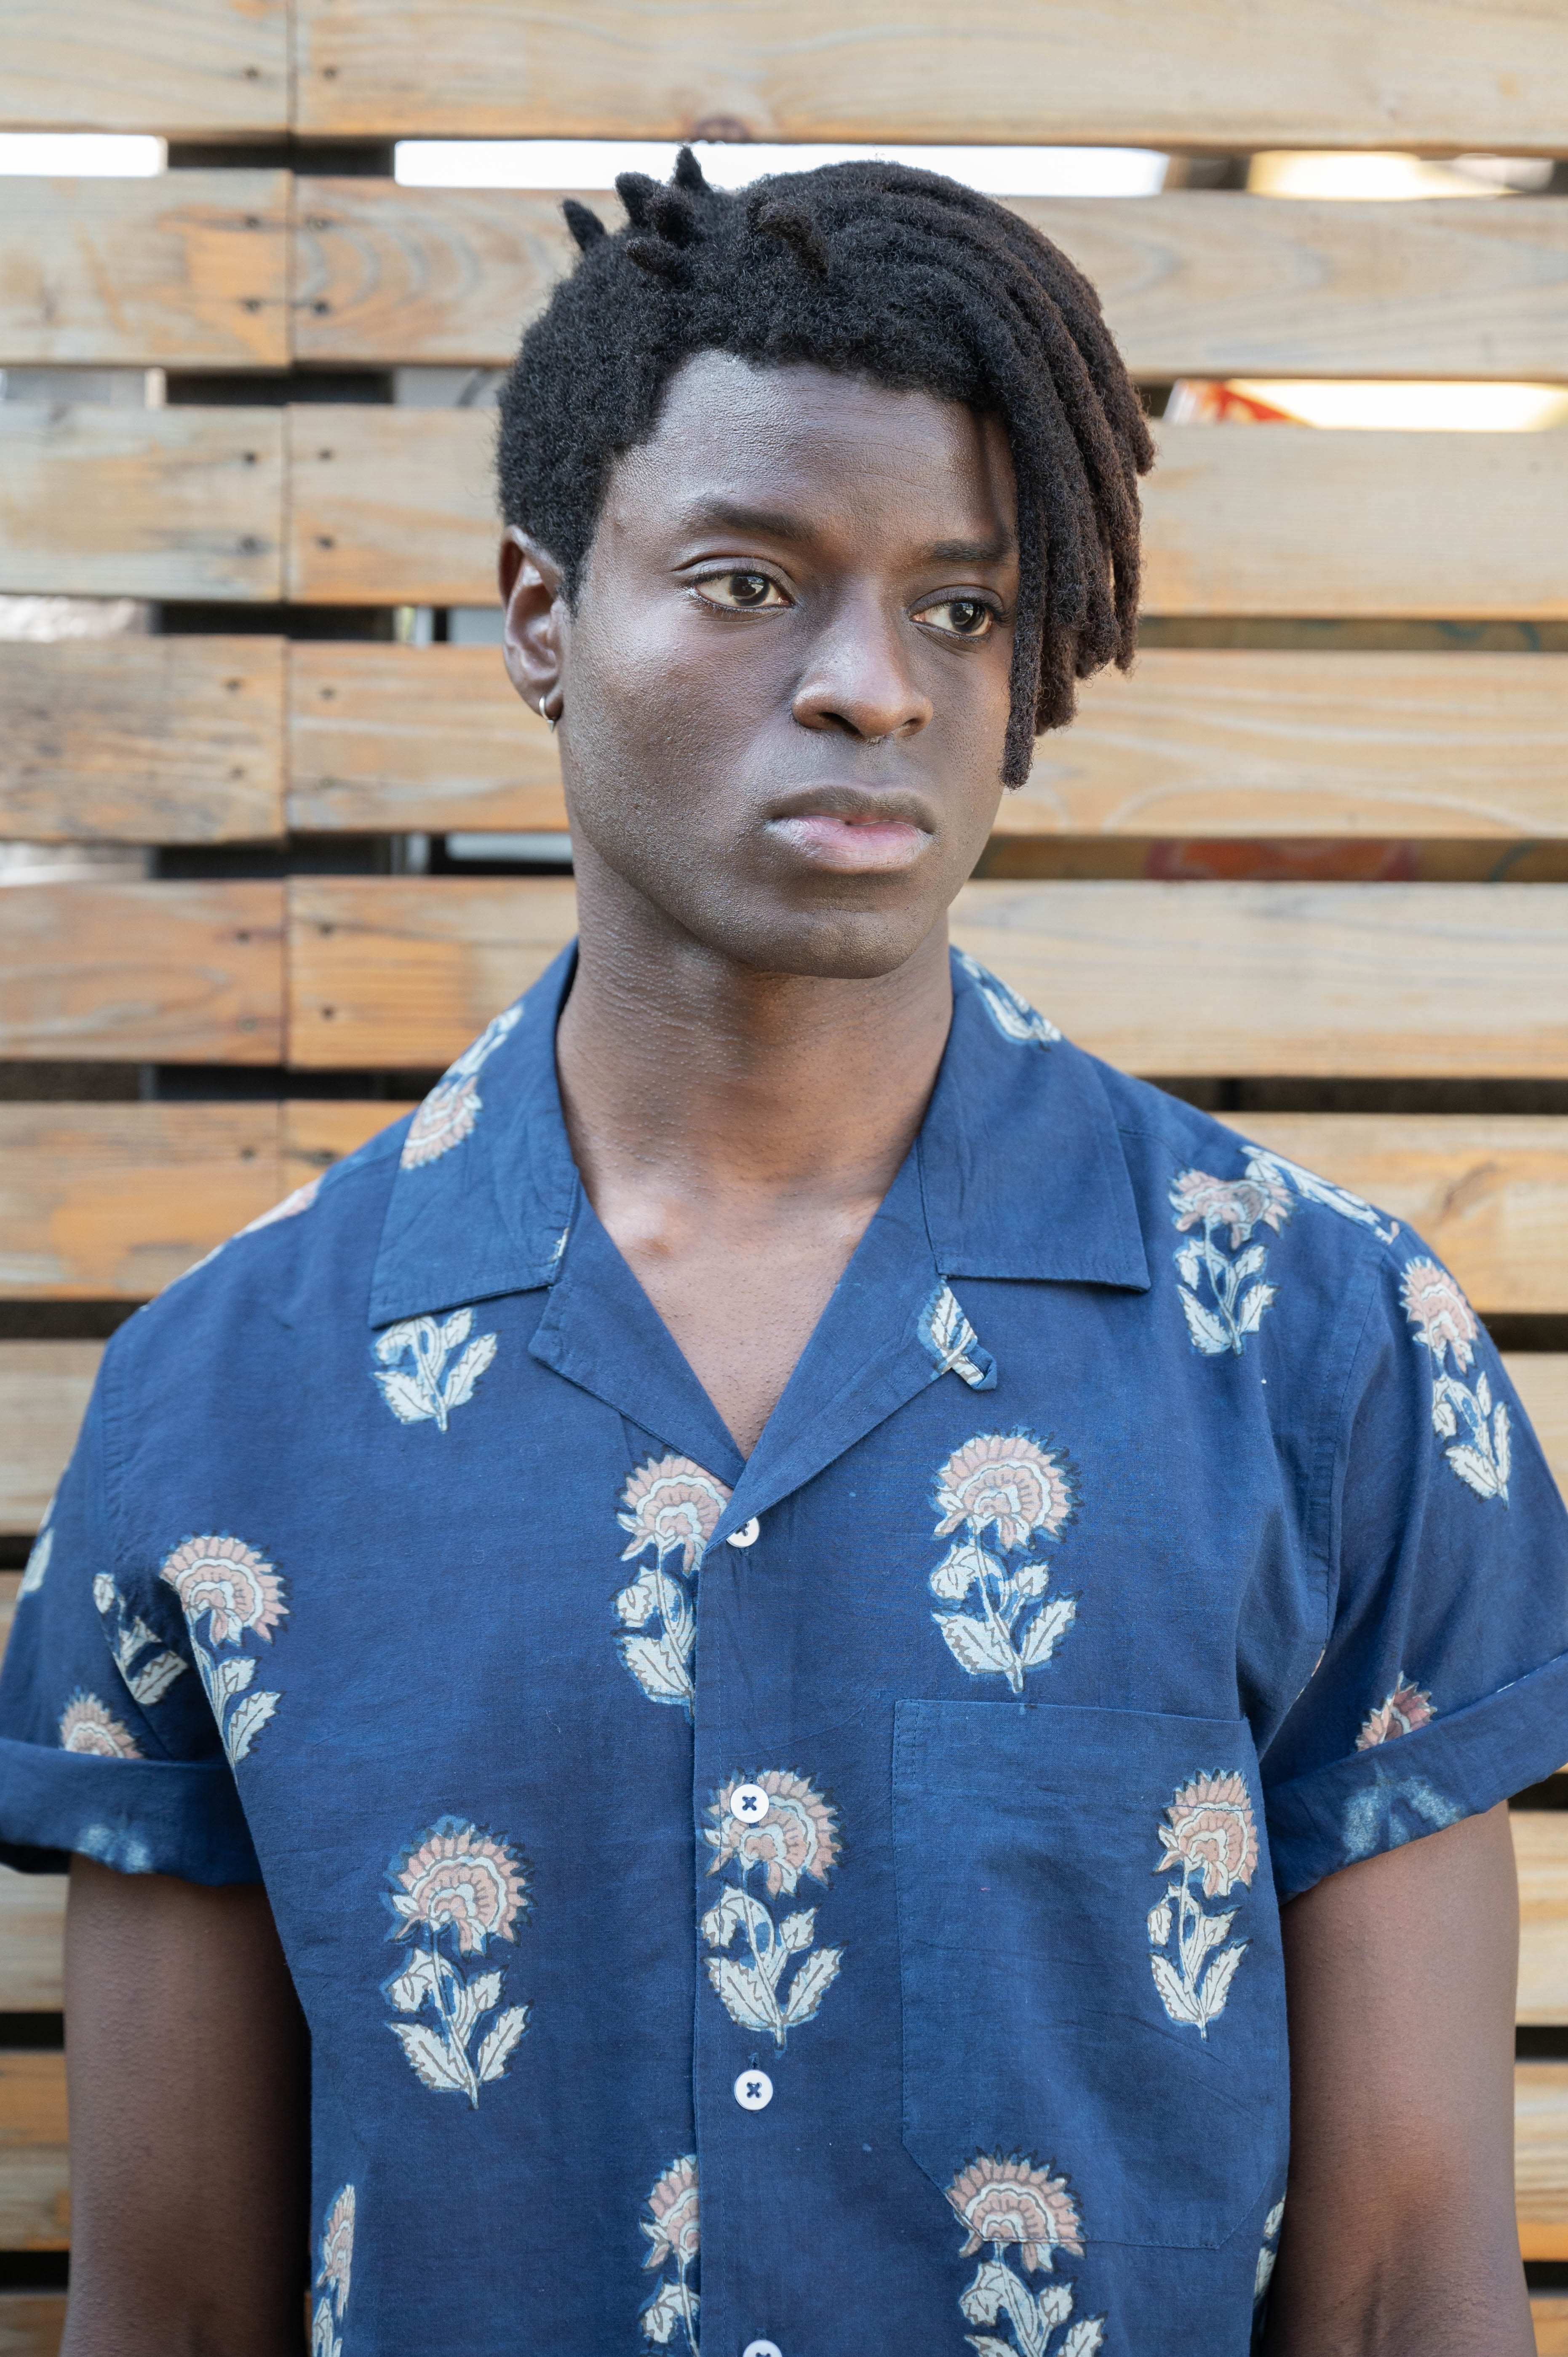 Hand Block Printed 'The Don' Camp Collar Shirt in Navy Tribal Floral Print